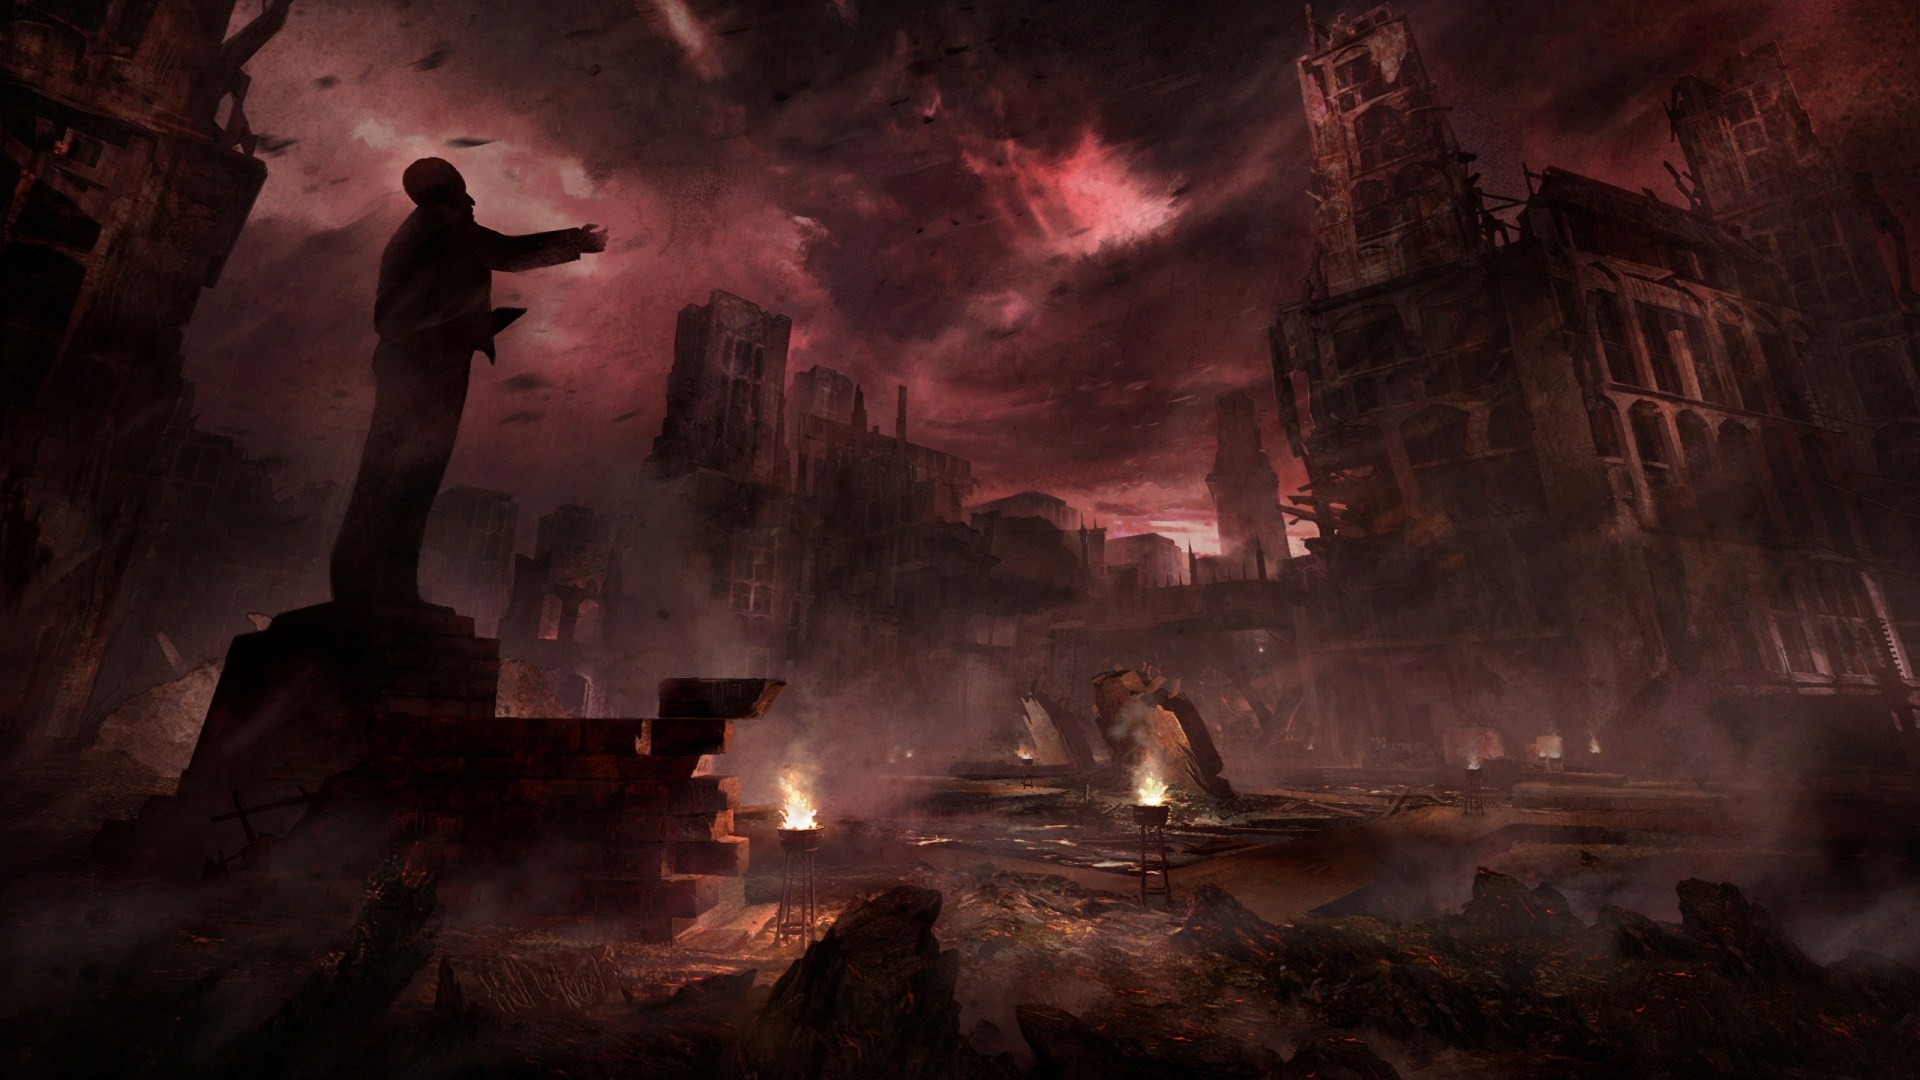 General 1920x1080 The Secret World video games concept art statue apocalyptic city PC gaming dark video game art ruins